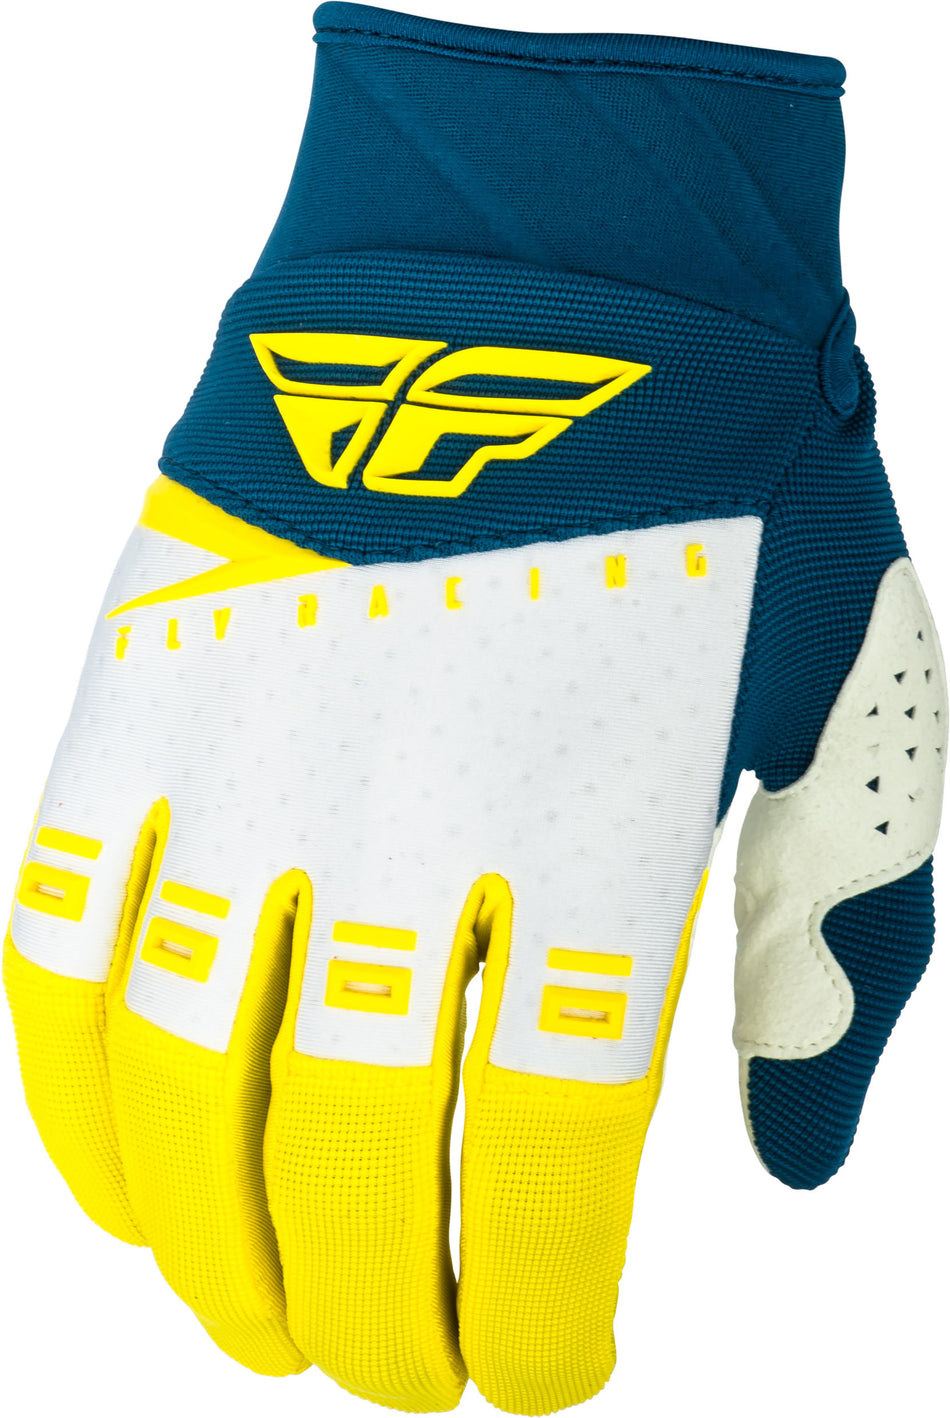 FLY RACING F-16 Gloves Yellow/White/Navy Sz 05 372-91305